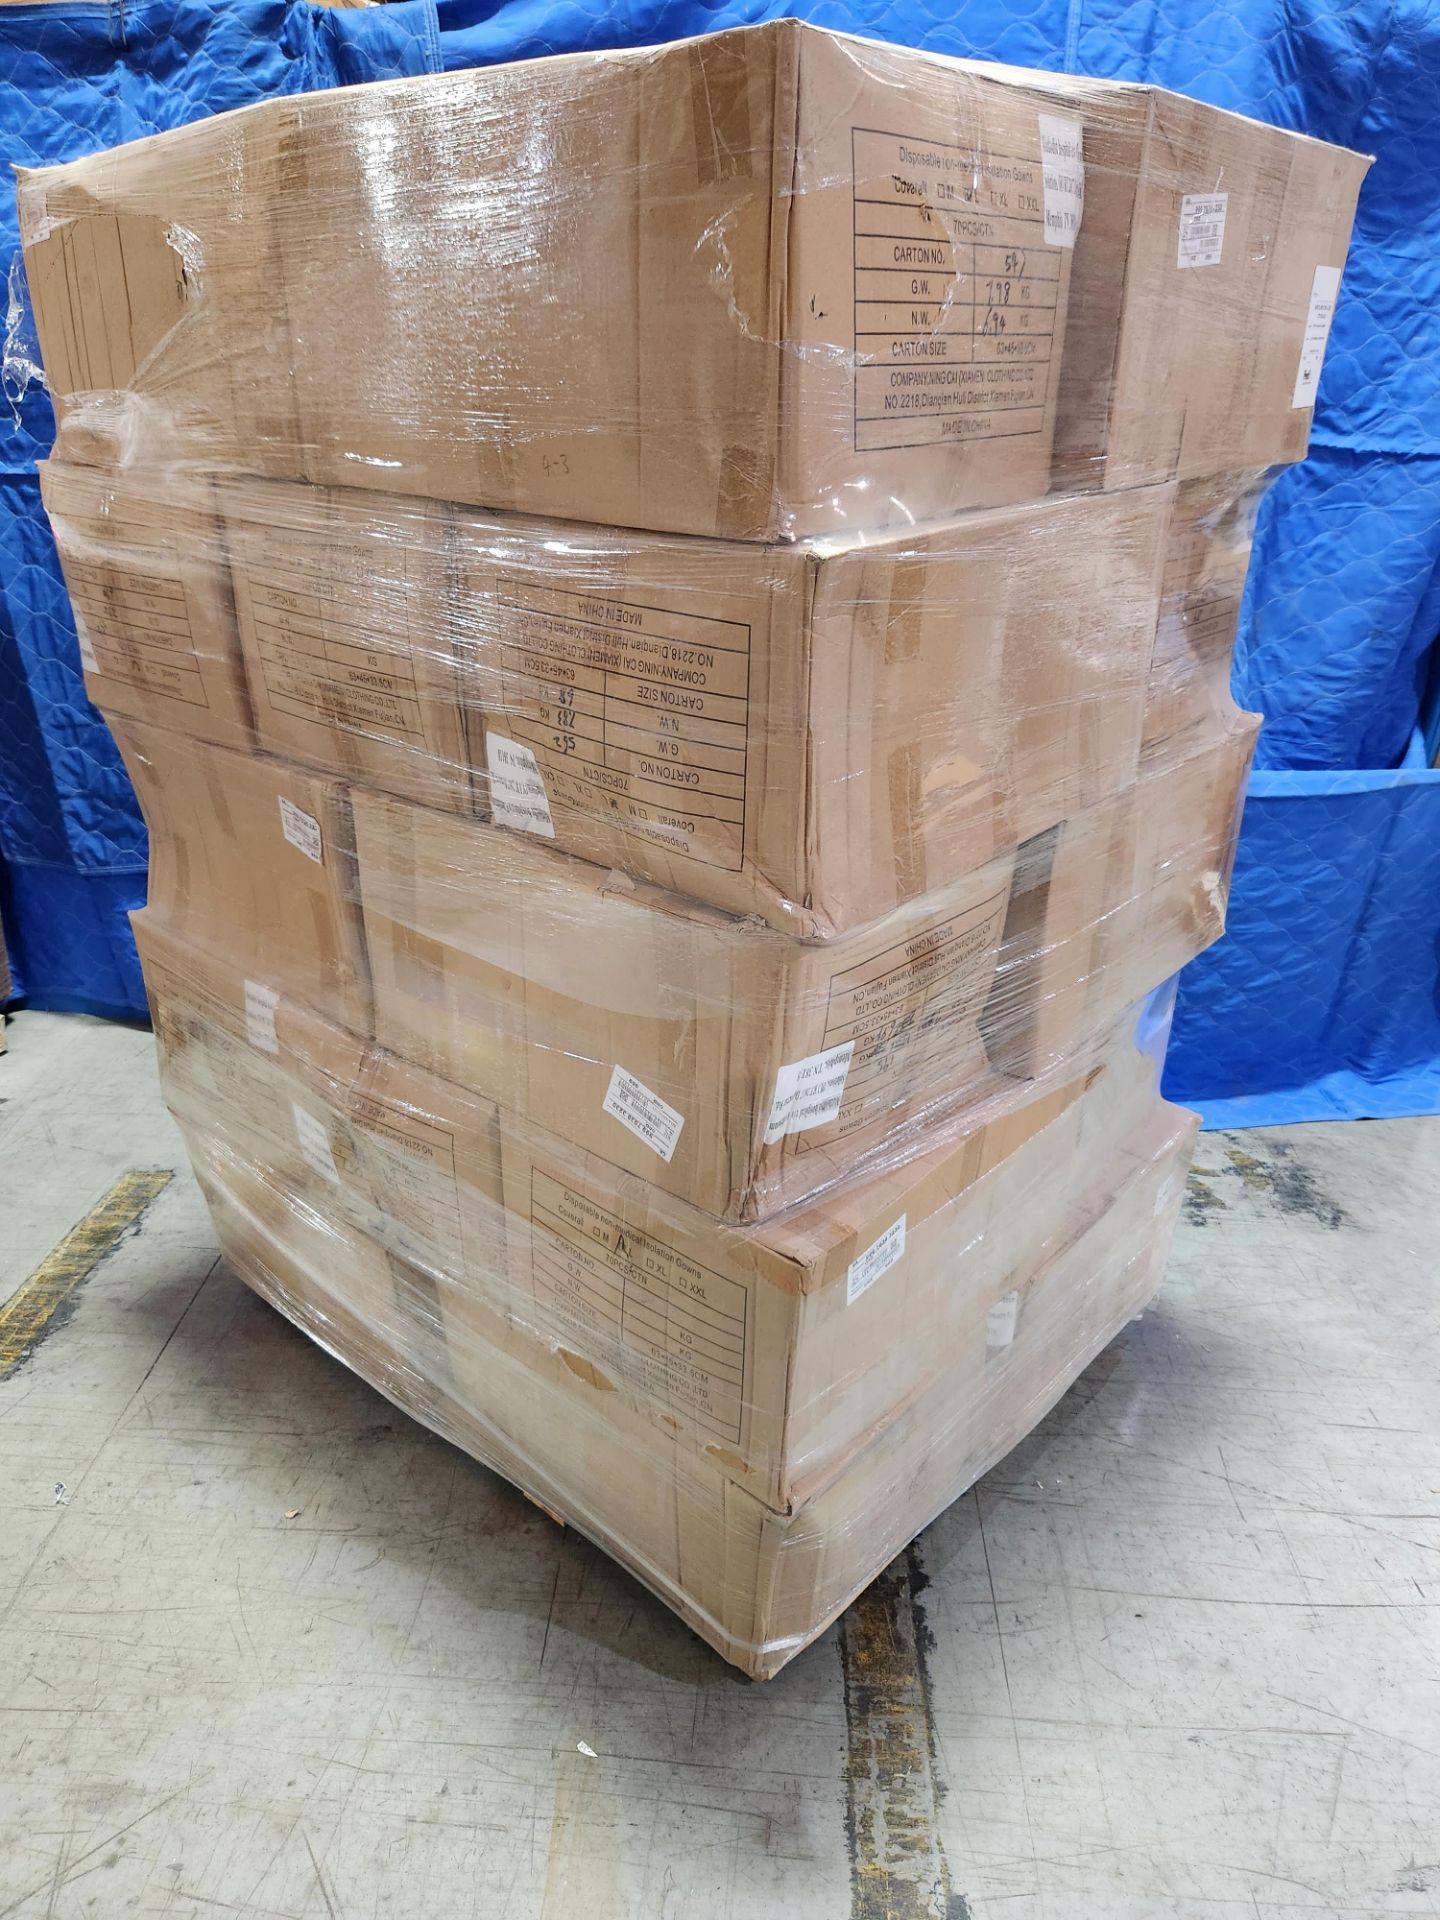 CATHAY PACIFIC ISOLATION GOWN-L-DISPOSABLE 64 BOXES 70 PER PACKAGE - Image 2 of 2